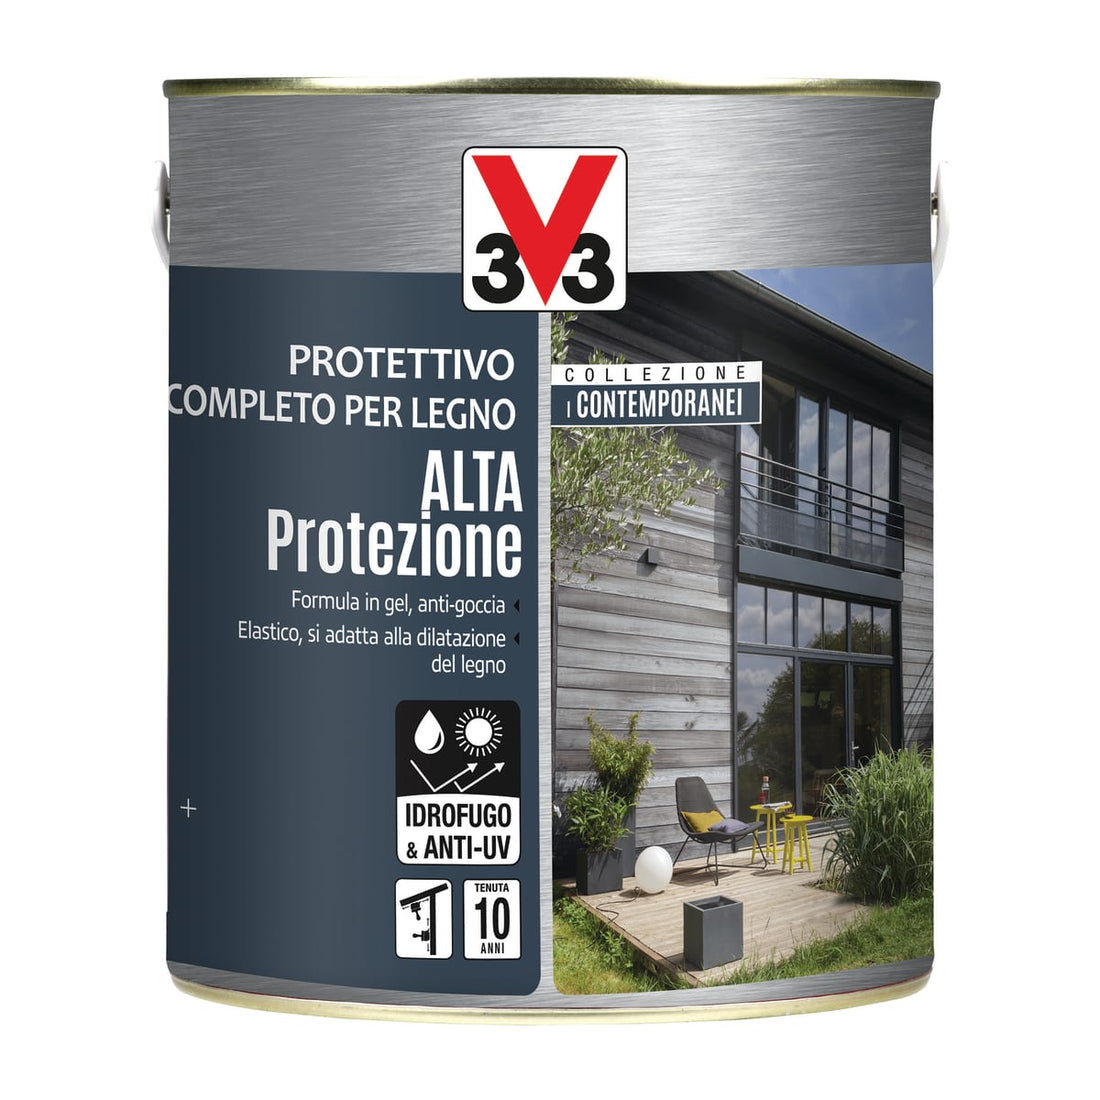 WATER-BASED PROTECTIVE WOOD PRIMER SILVER GREY HIGH PROTECTION V33 2.5 L